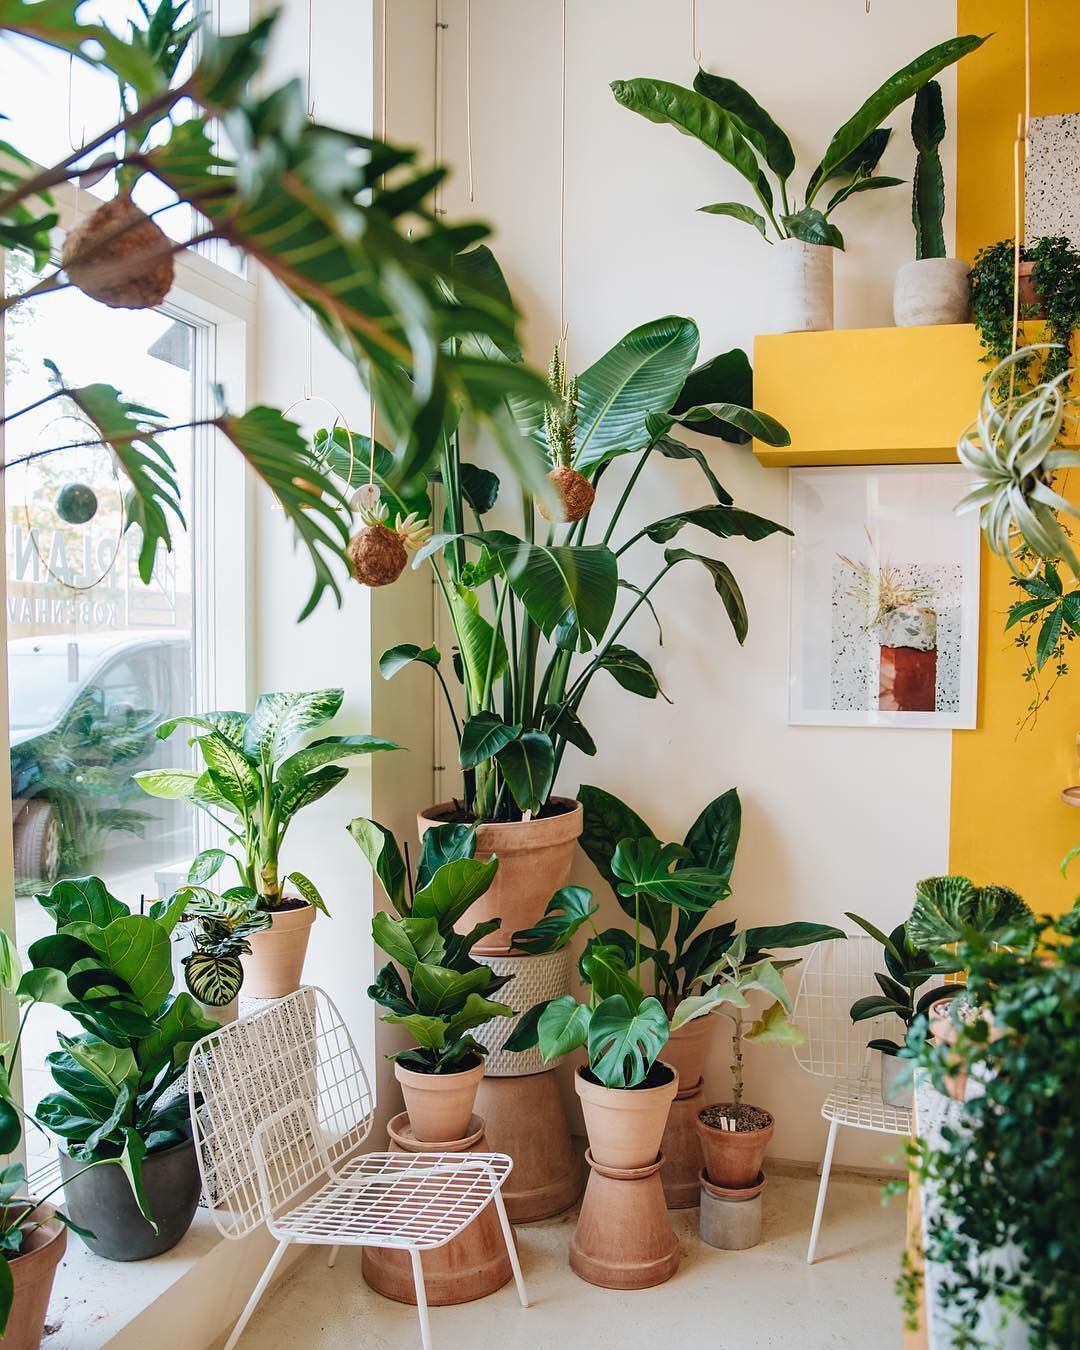 Install Faux Plant or Living Plant